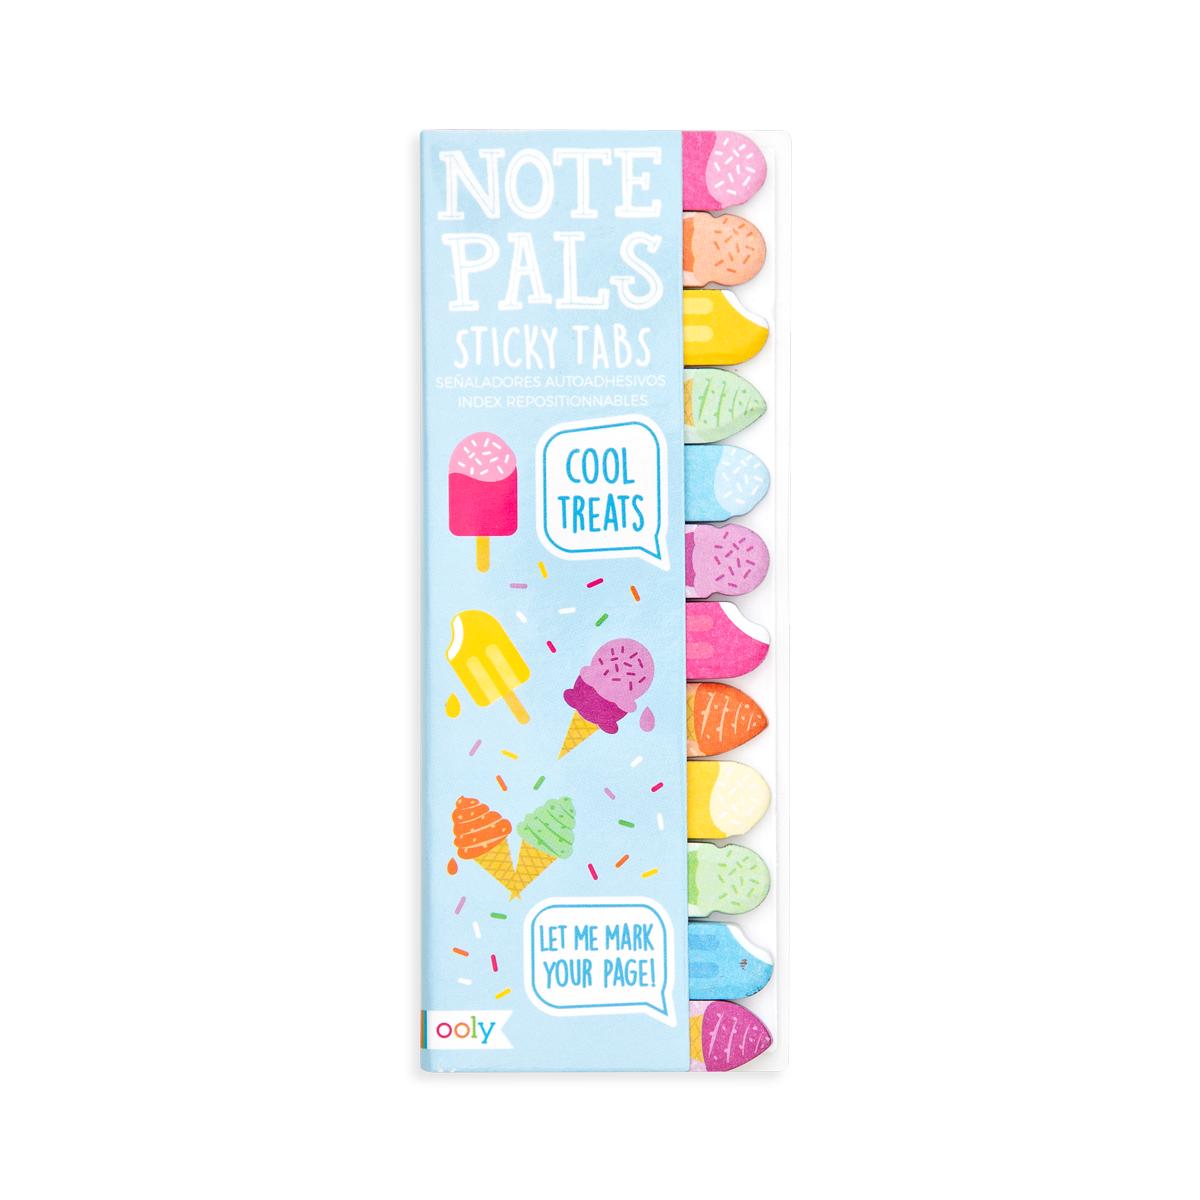 Ooly Note Pals Sticky Tabs - Friendly Fish